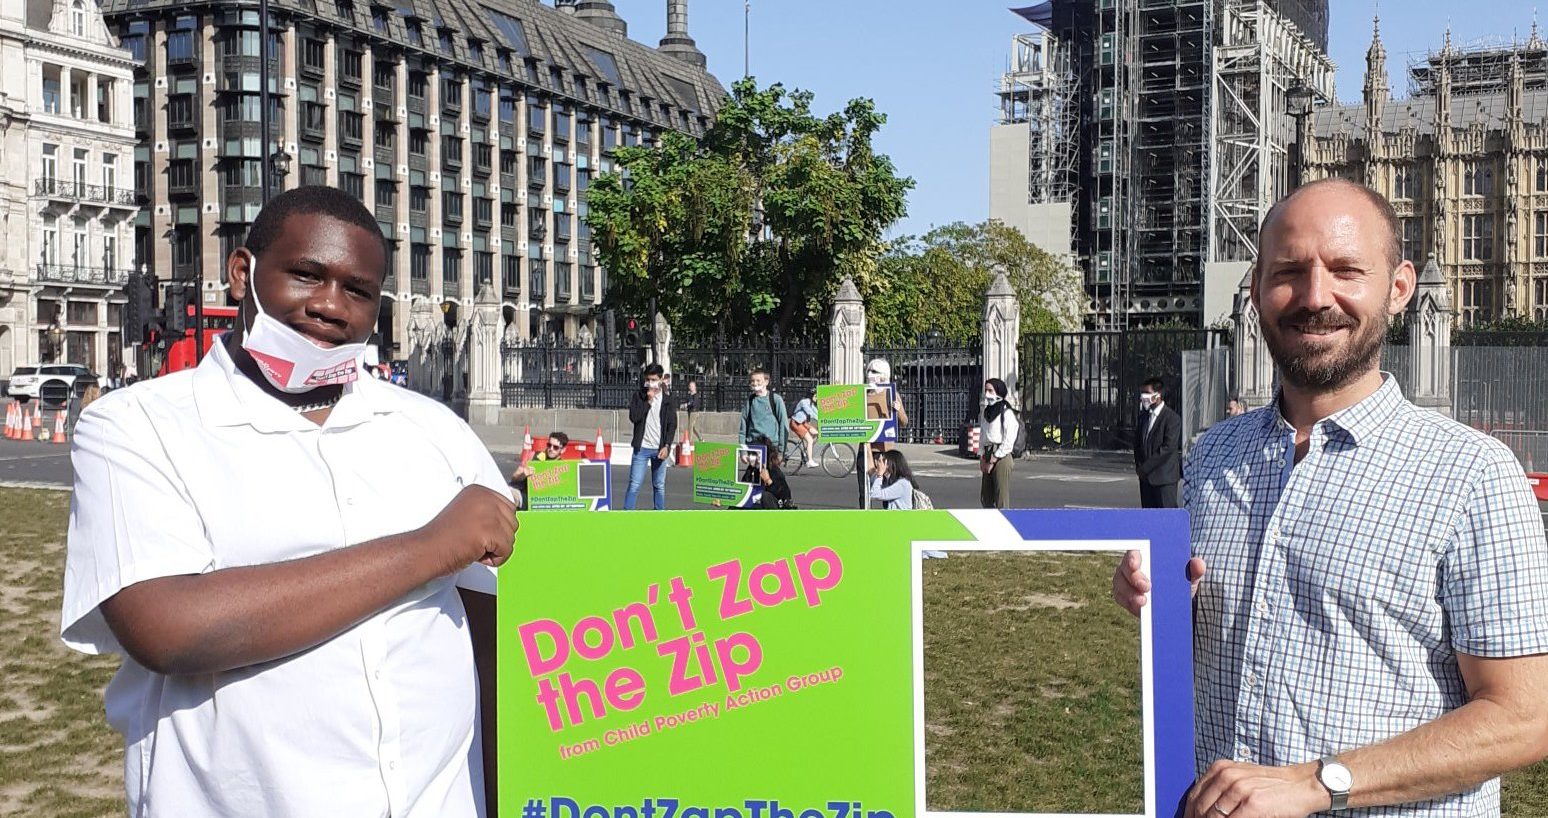 Don't zap the zip! Cllr Ed Davie and Joshua Brown Smith with a sign at the protest in Parliament Square